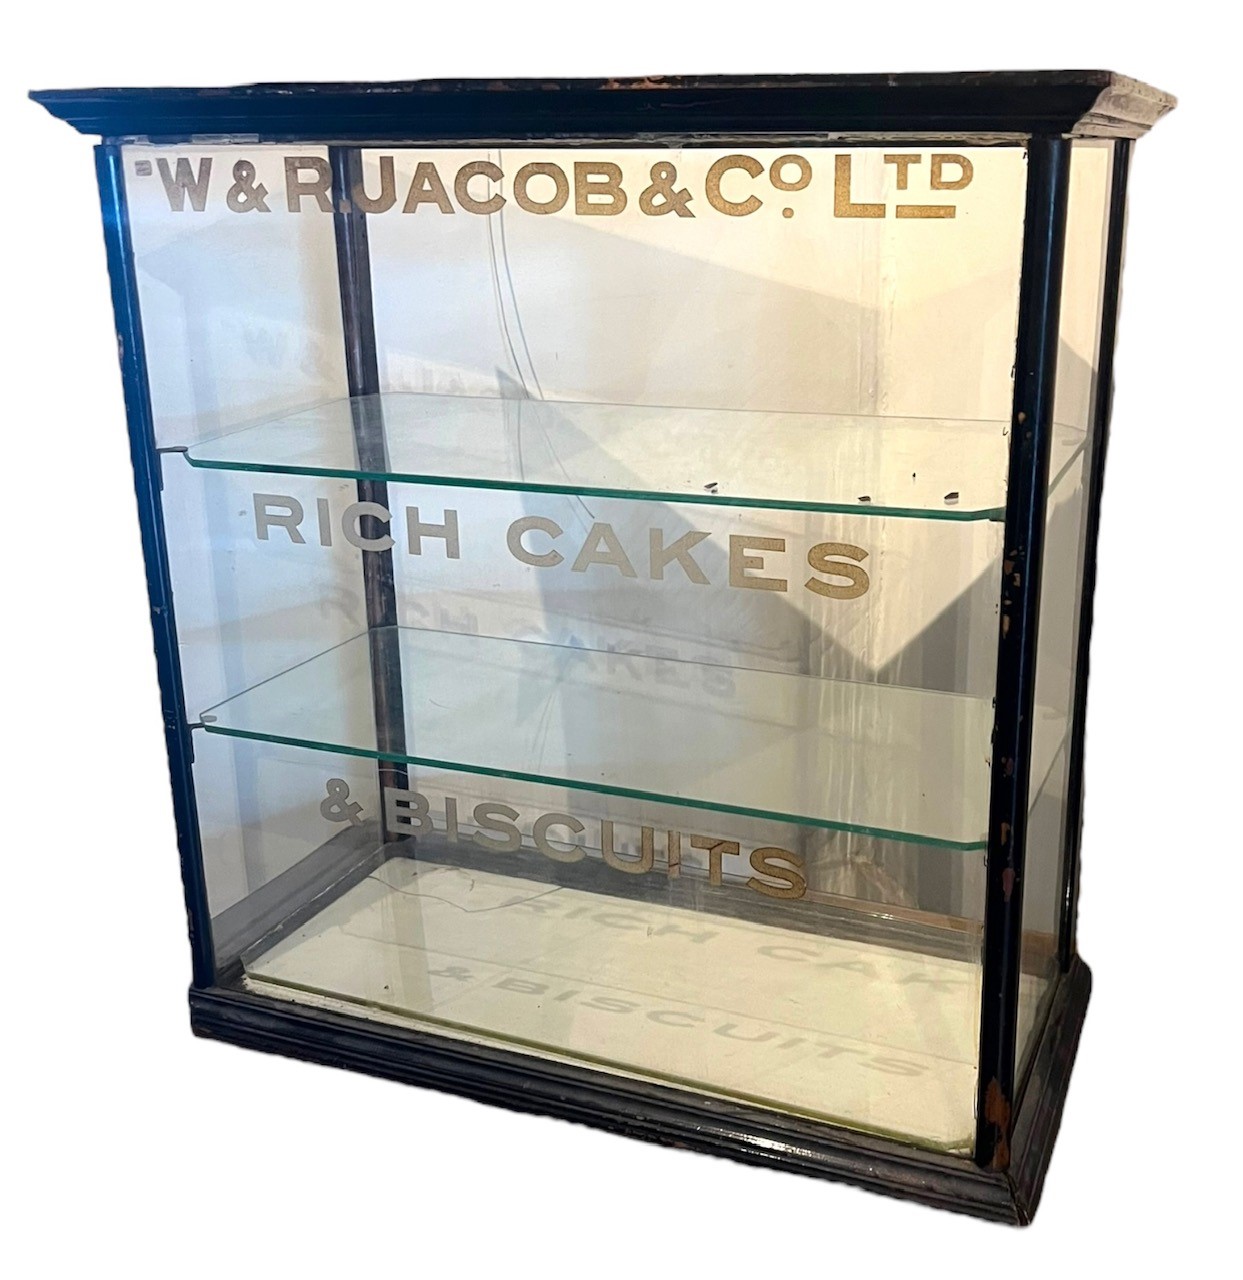 AN EARLY 20TH CENTURY W&R JACOBS & CO. LTD TABLETOP SHOP GLAZED CABINET Advertising rich cakes and - Image 3 of 3